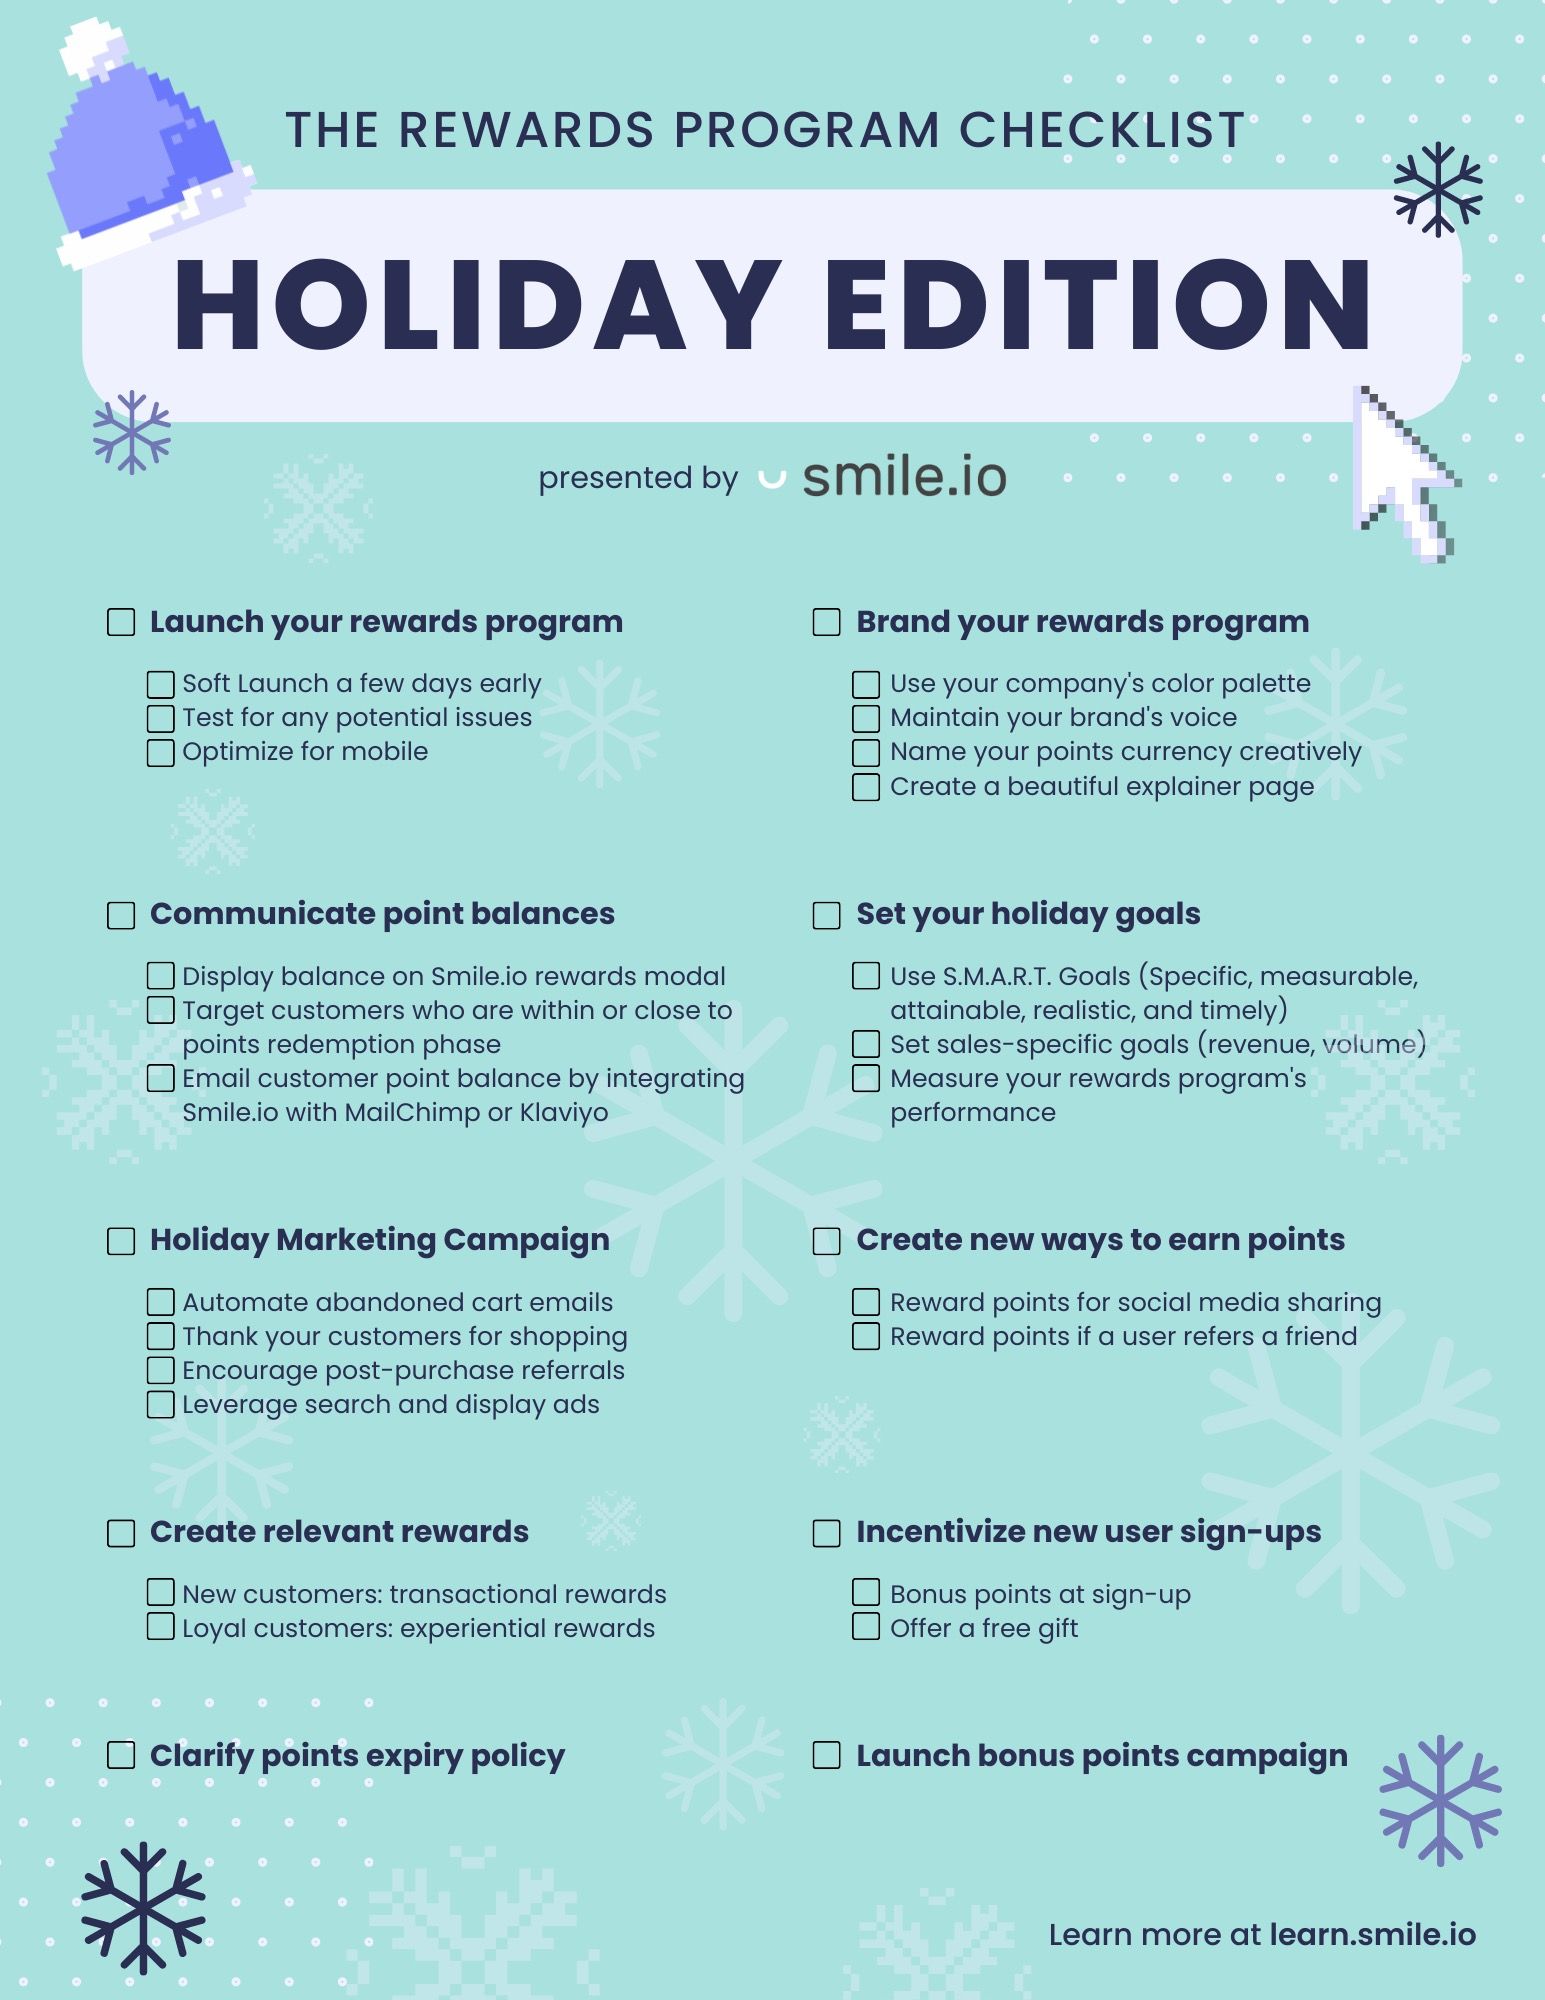 Rewards Program Holiday Checklist—A graphic with a blue background and snowflakes on it showing “The Rewards Program Checklist: Holiday Edition presented by Smile”. It lists the 10 checklist items and the subtasks of each with checkboxes. The are: “1. Launch your rewards program—Soft Launch a few days early, test for any potential issues, and optimize for mobile. 2. Brand your rewards program—Use your company's color palette, maintain your brand's voice, name your points currency creatively, and create a beautiful explainer page. 3. Communicate point balances—Display balance on Smile.io rewards modal, target customers who are within or close to points redemption phase, and email customer point balance by integrating Smile.io with MailChimp or Klaviyo. 4. Set your holiday goals—Use S.M.A.R.T. Goals (Specific, measurable, attainable, realistic, and timely), set sales-specific goals (revenue, volume), and measure your rewards program’s performance. 5. Holiday Marketing Campaign—Automate abandoned cart emails, thank your customers for shopping, encourage post-purchase referrals, and leverage search and display ads. 6. Create new ways to earn points—Reward points for social media sharing, and reward points if a user refers a friend. 7. Create relevant rewards—New customers: transactional rewards, and loyal customers: experiential rewards. 8. Incentivize new user sign-ups—Bonus points at sign-up, and offer a free gift. 9. Clarify points expiry policy. 10. Launch bonus points campaign.” The bottom corner reads, “Learn more at learn.smile.io”